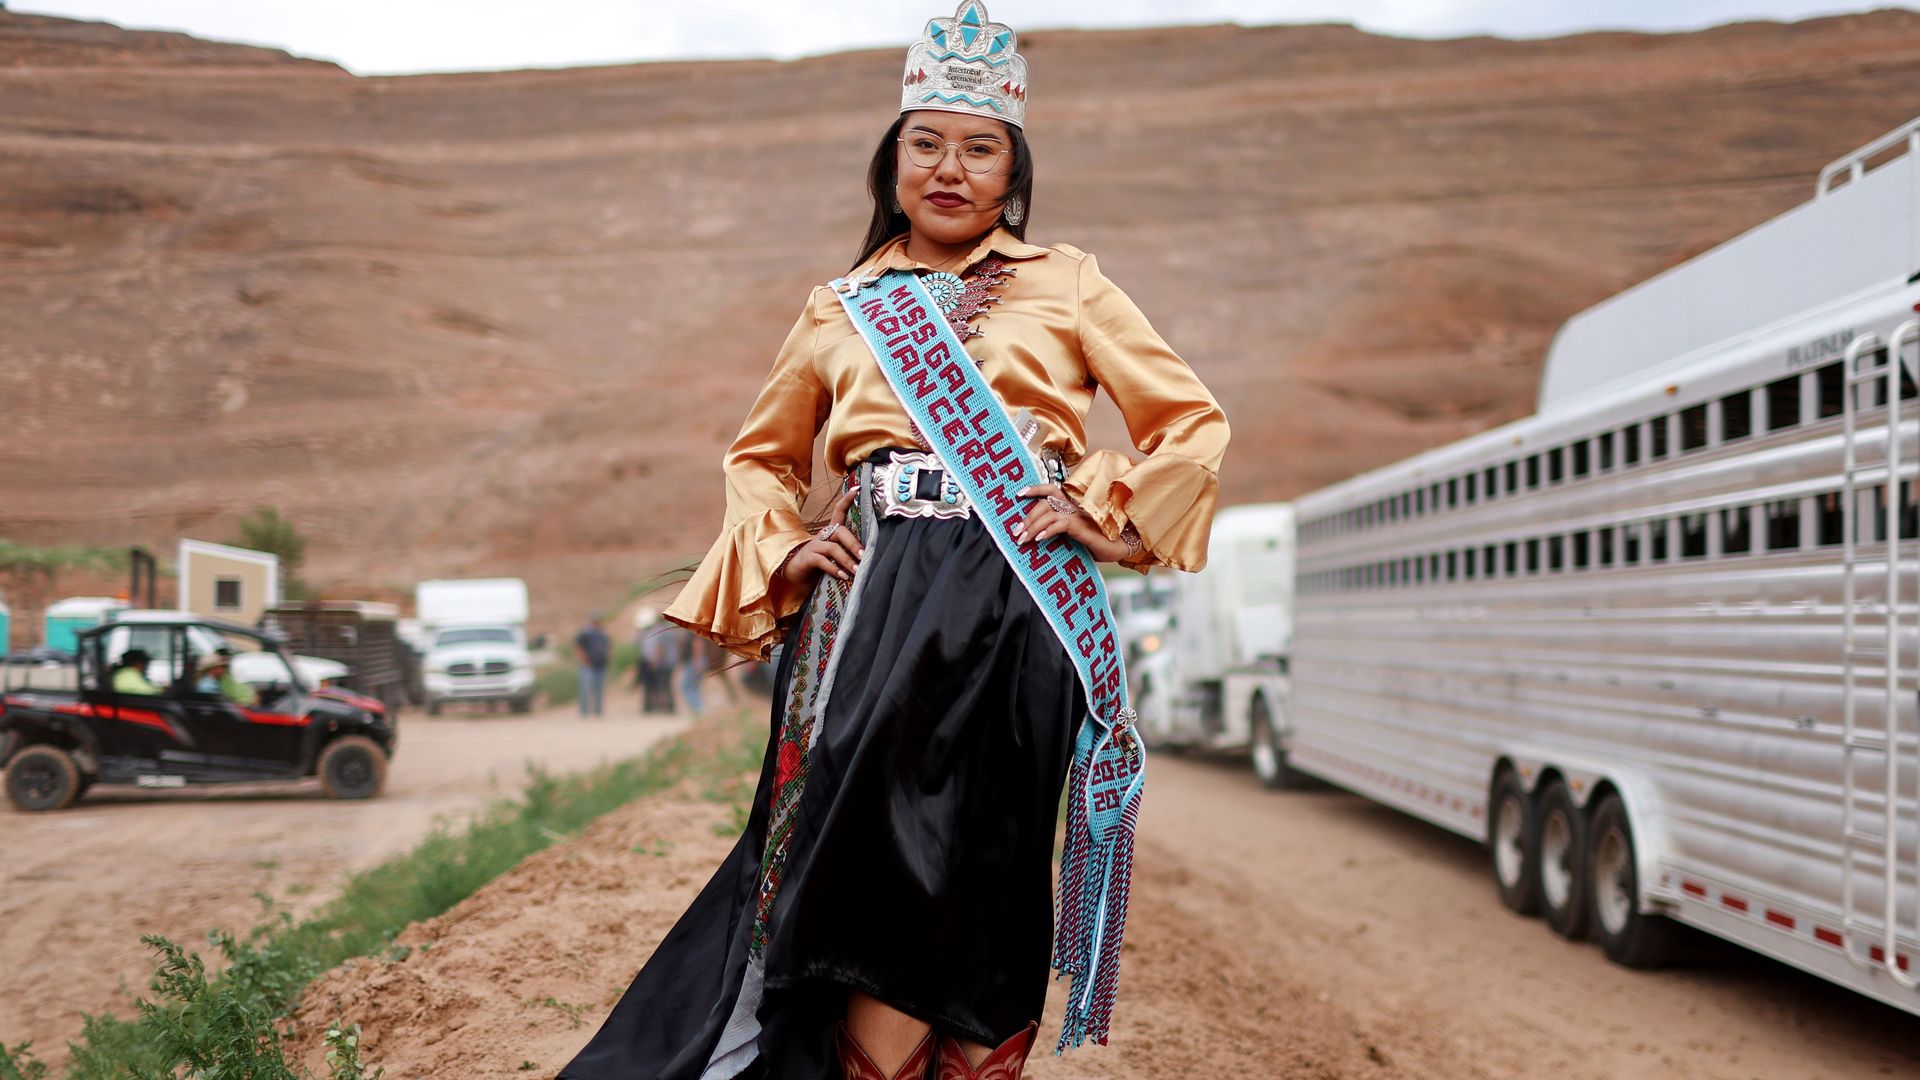 An indigenous woman from New Mexico stands with the mountains in the background. She is wearing a crown and sash